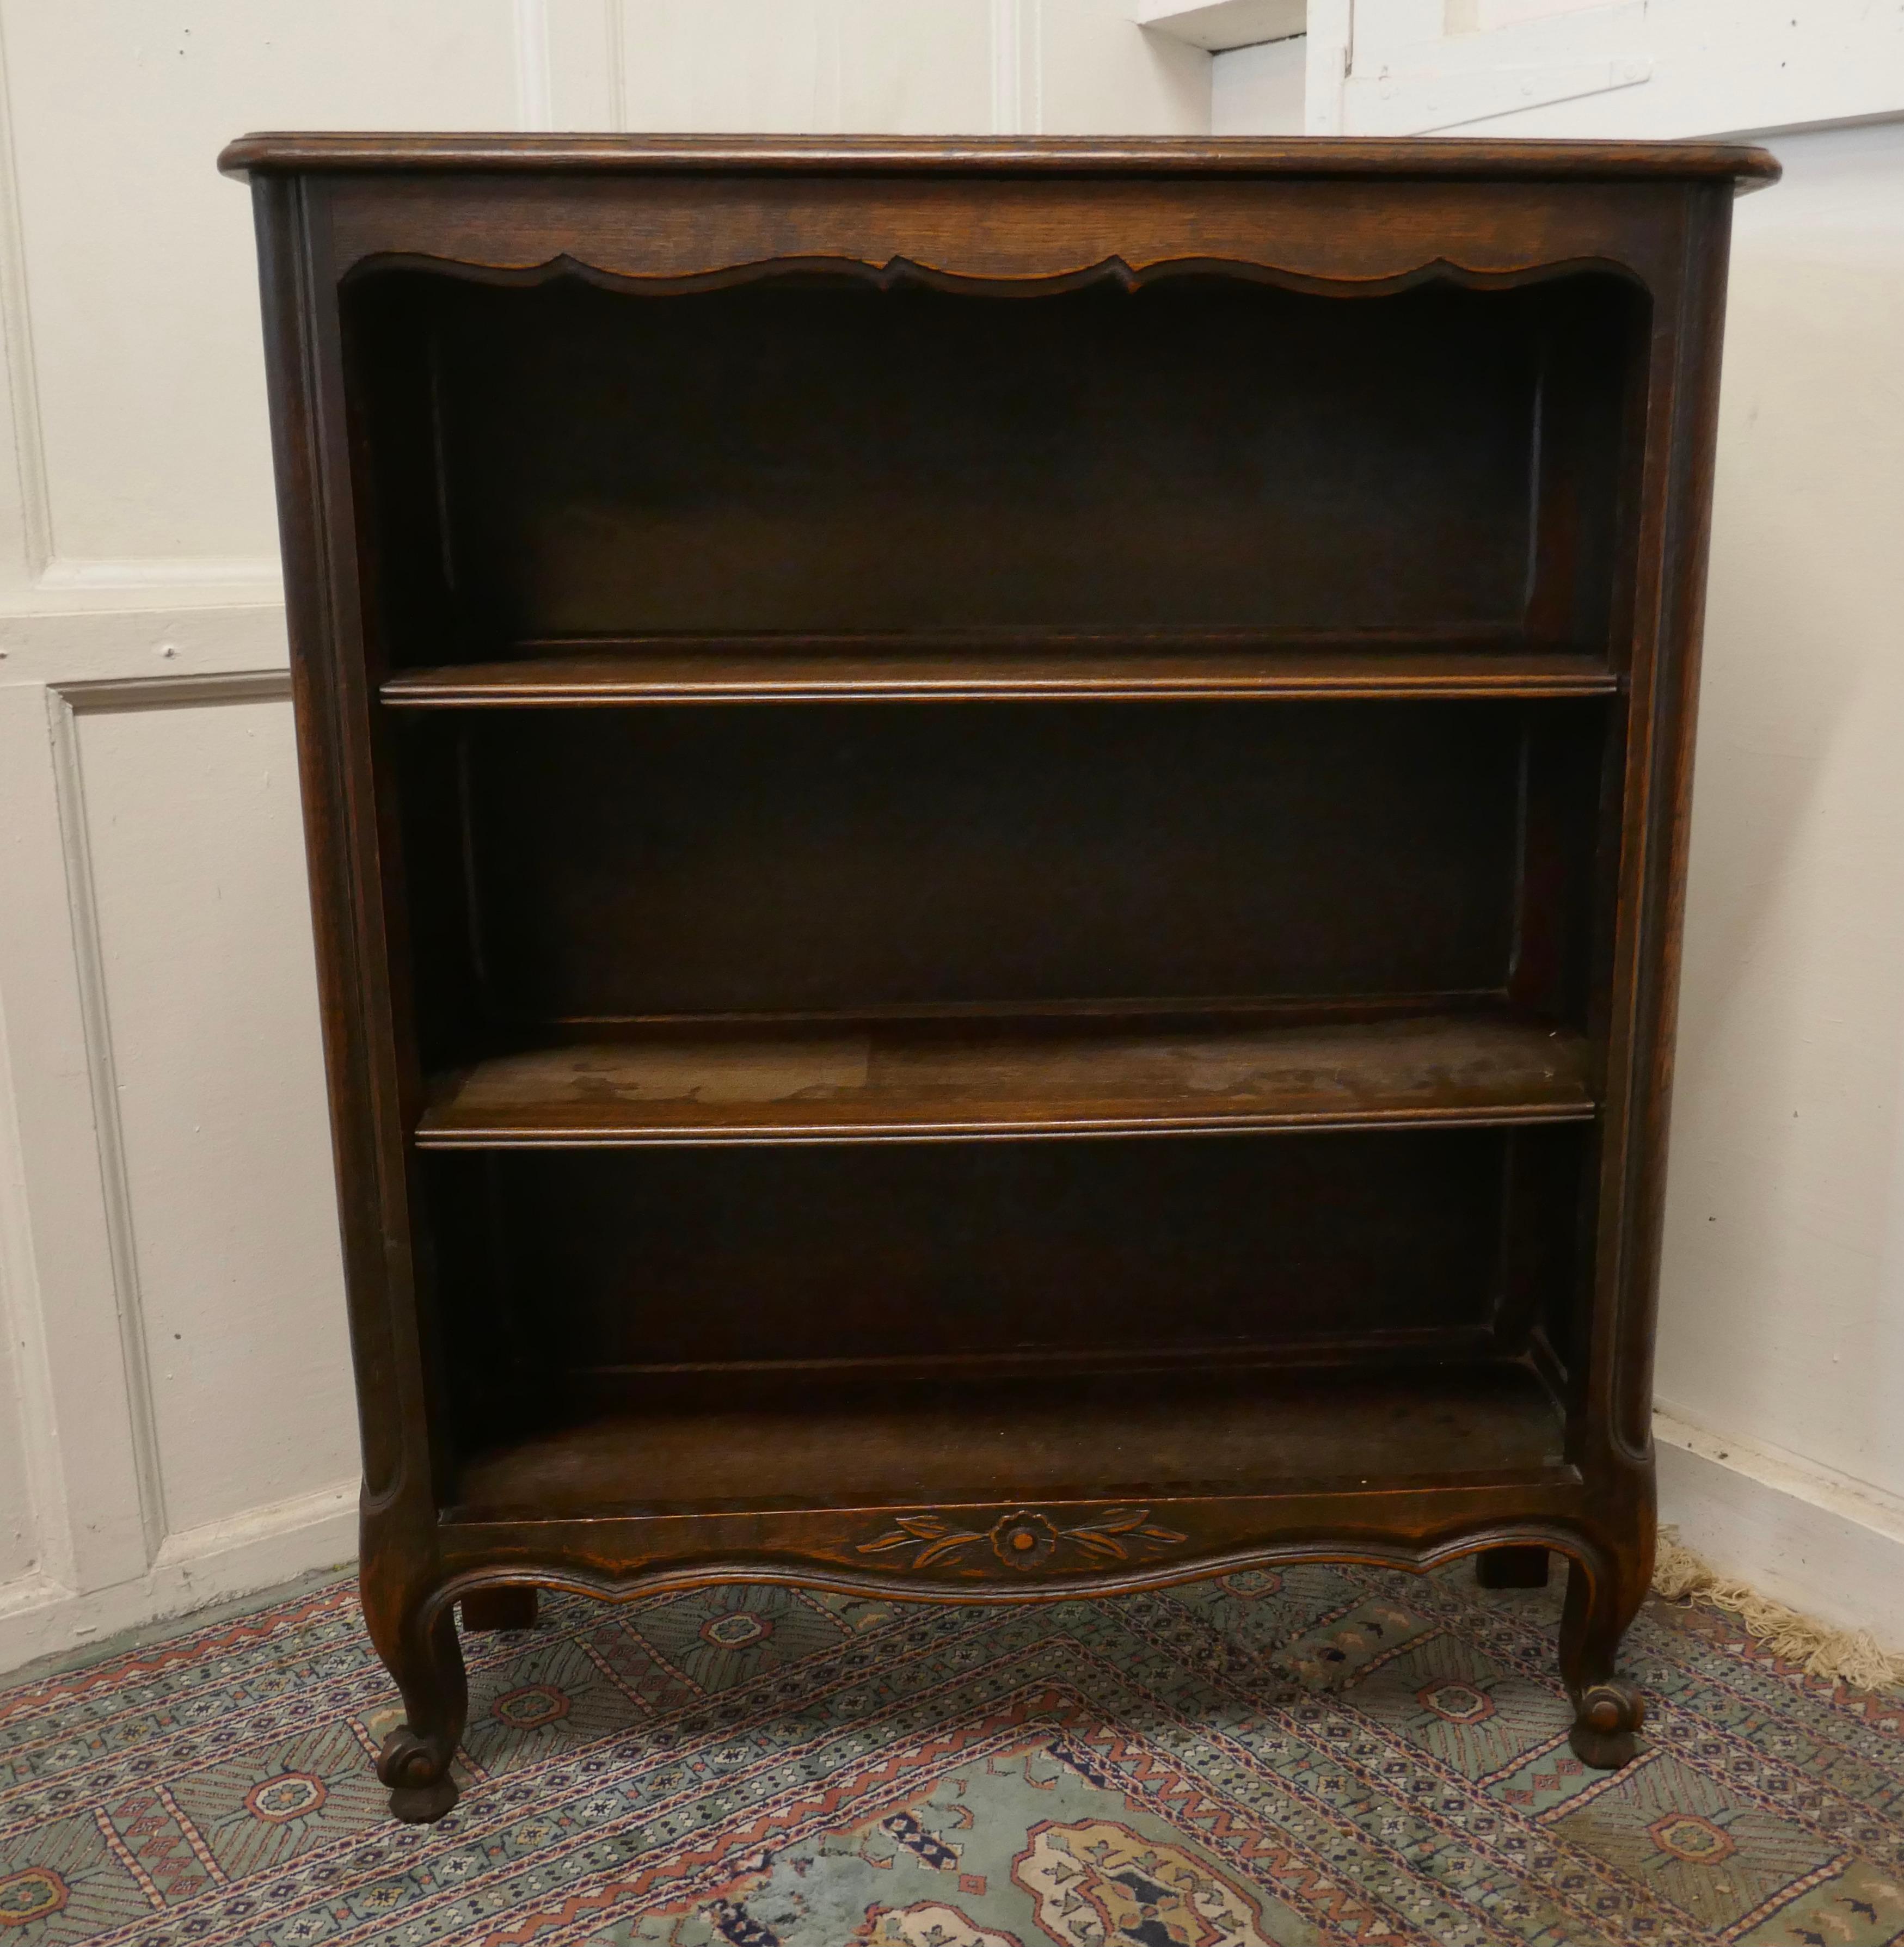 French oak open bookcase

This is a useful piece, it is made in oak and stands on short cabriole legs with a small carved decoration at the bottom
The bookcase has 2 moveable shelves the shelf is in good condition 
The book case is 39” high, 33”